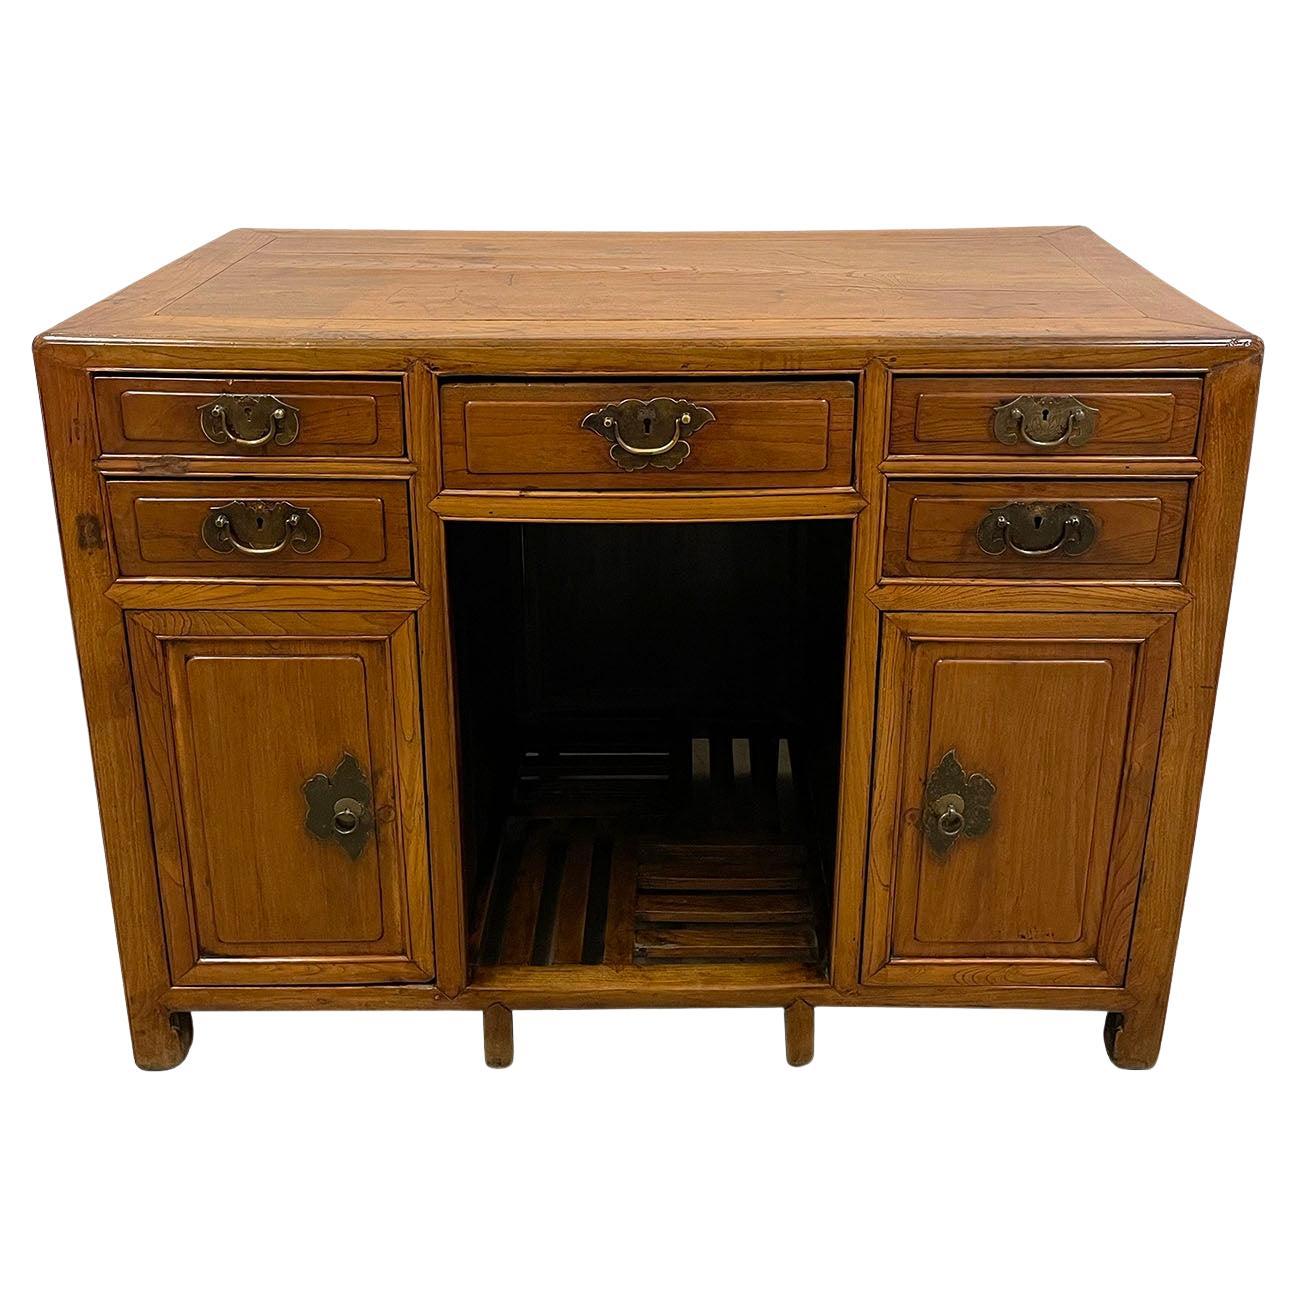 Antique, Chinese Beech Wood Writing Desk, Vanity